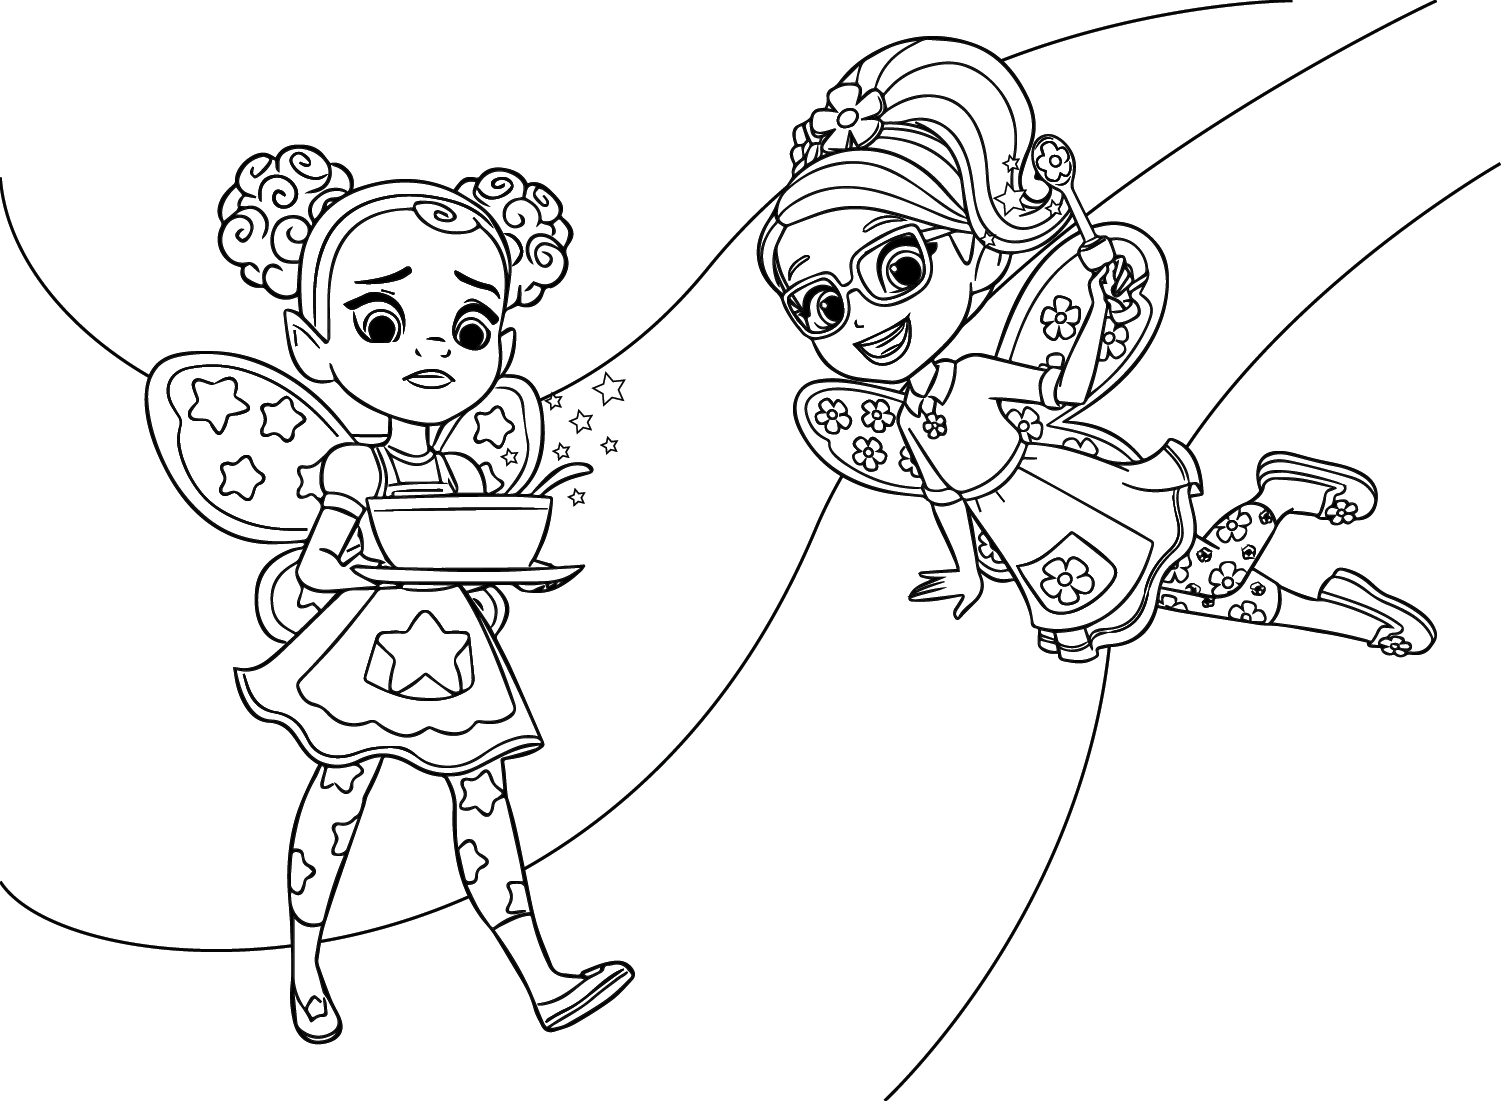 Butterbean And Cookie Coloring Page - Free Printable Coloring Pages